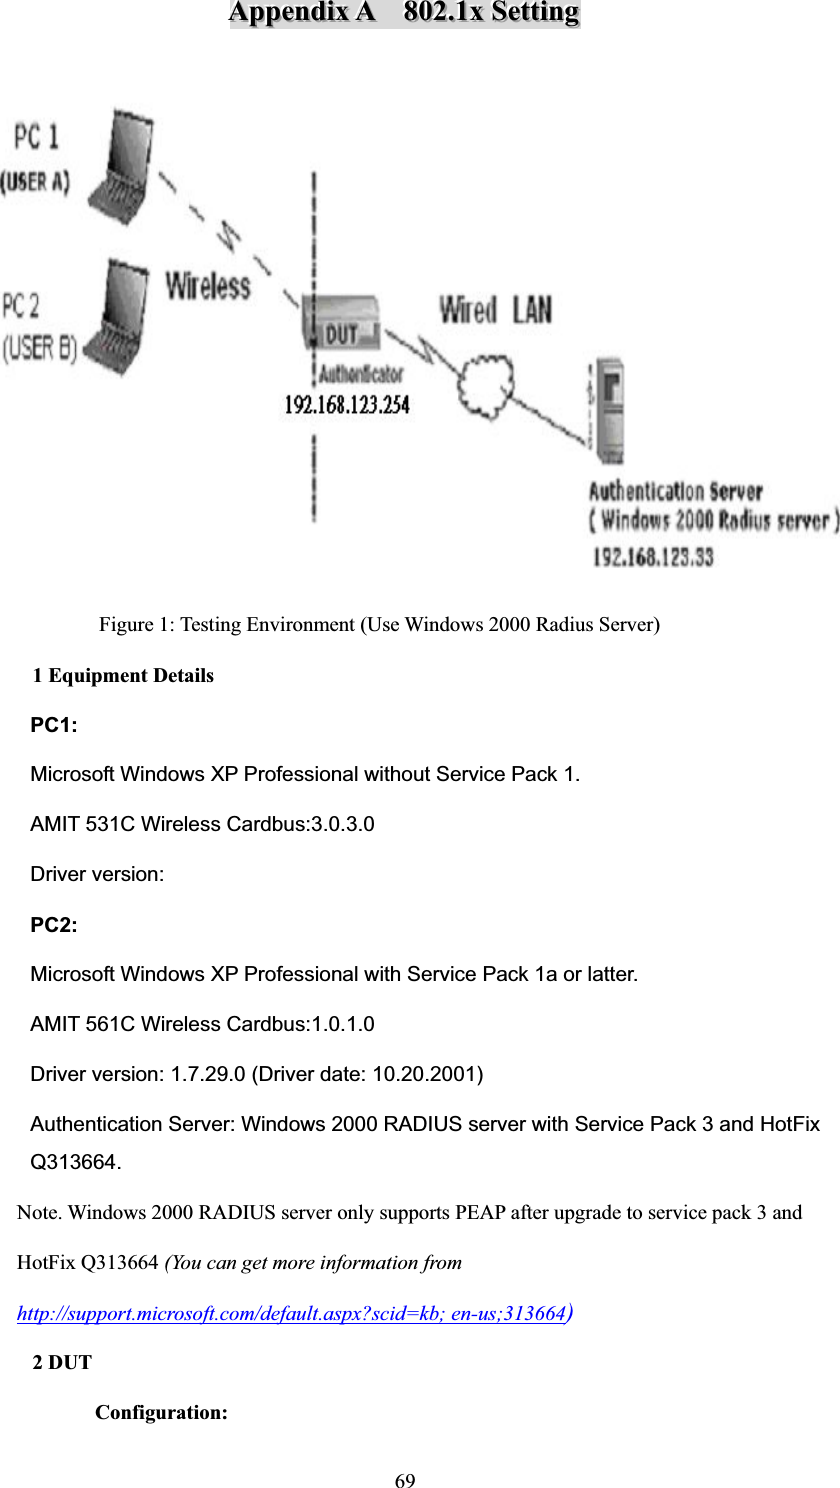 69AAAppppppeeennndddiiixxxAAA888000222...111xxxSSSeeettttttiiinnngggFigure 1: Testing Environment (Use Windows 2000 Radius Server) 1 Equipment Details PC1:  Microsoft Windows XP Professional without Service Pack 1. AMIT 531C Wireless Cardbus:3.0.3.0 Driver version:   PC2:  Microsoft Windows XP Professional with Service Pack 1a or latter. AMIT 561C Wireless Cardbus:1.0.1.0 Driver version: 1.7.29.0 (Driver date: 10.20.2001) Authentication Server: Windows 2000 RADIUS server with Service Pack 3 and HotFix Q313664.     Note. Windows 2000 RADIUS server only supports PEAP after upgrade to service pack 3 and         HotFix Q313664 (You can get more information from         http://support.microsoft.com/default.aspx?scid=kb; en-us;313664)2 DUT   Configuration: 